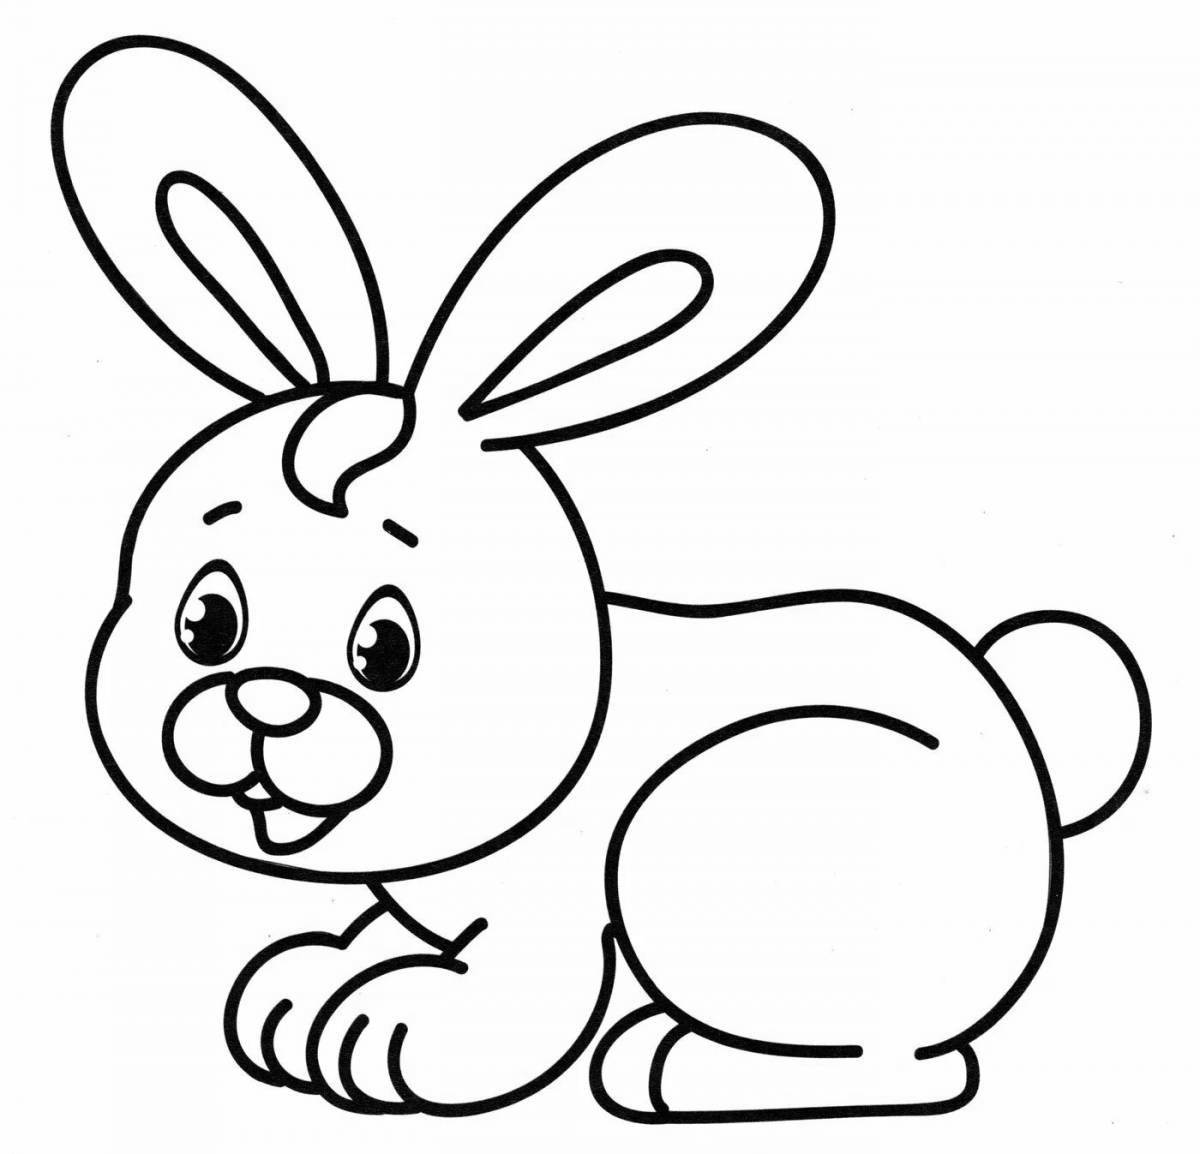 Shy rabbit coloring page